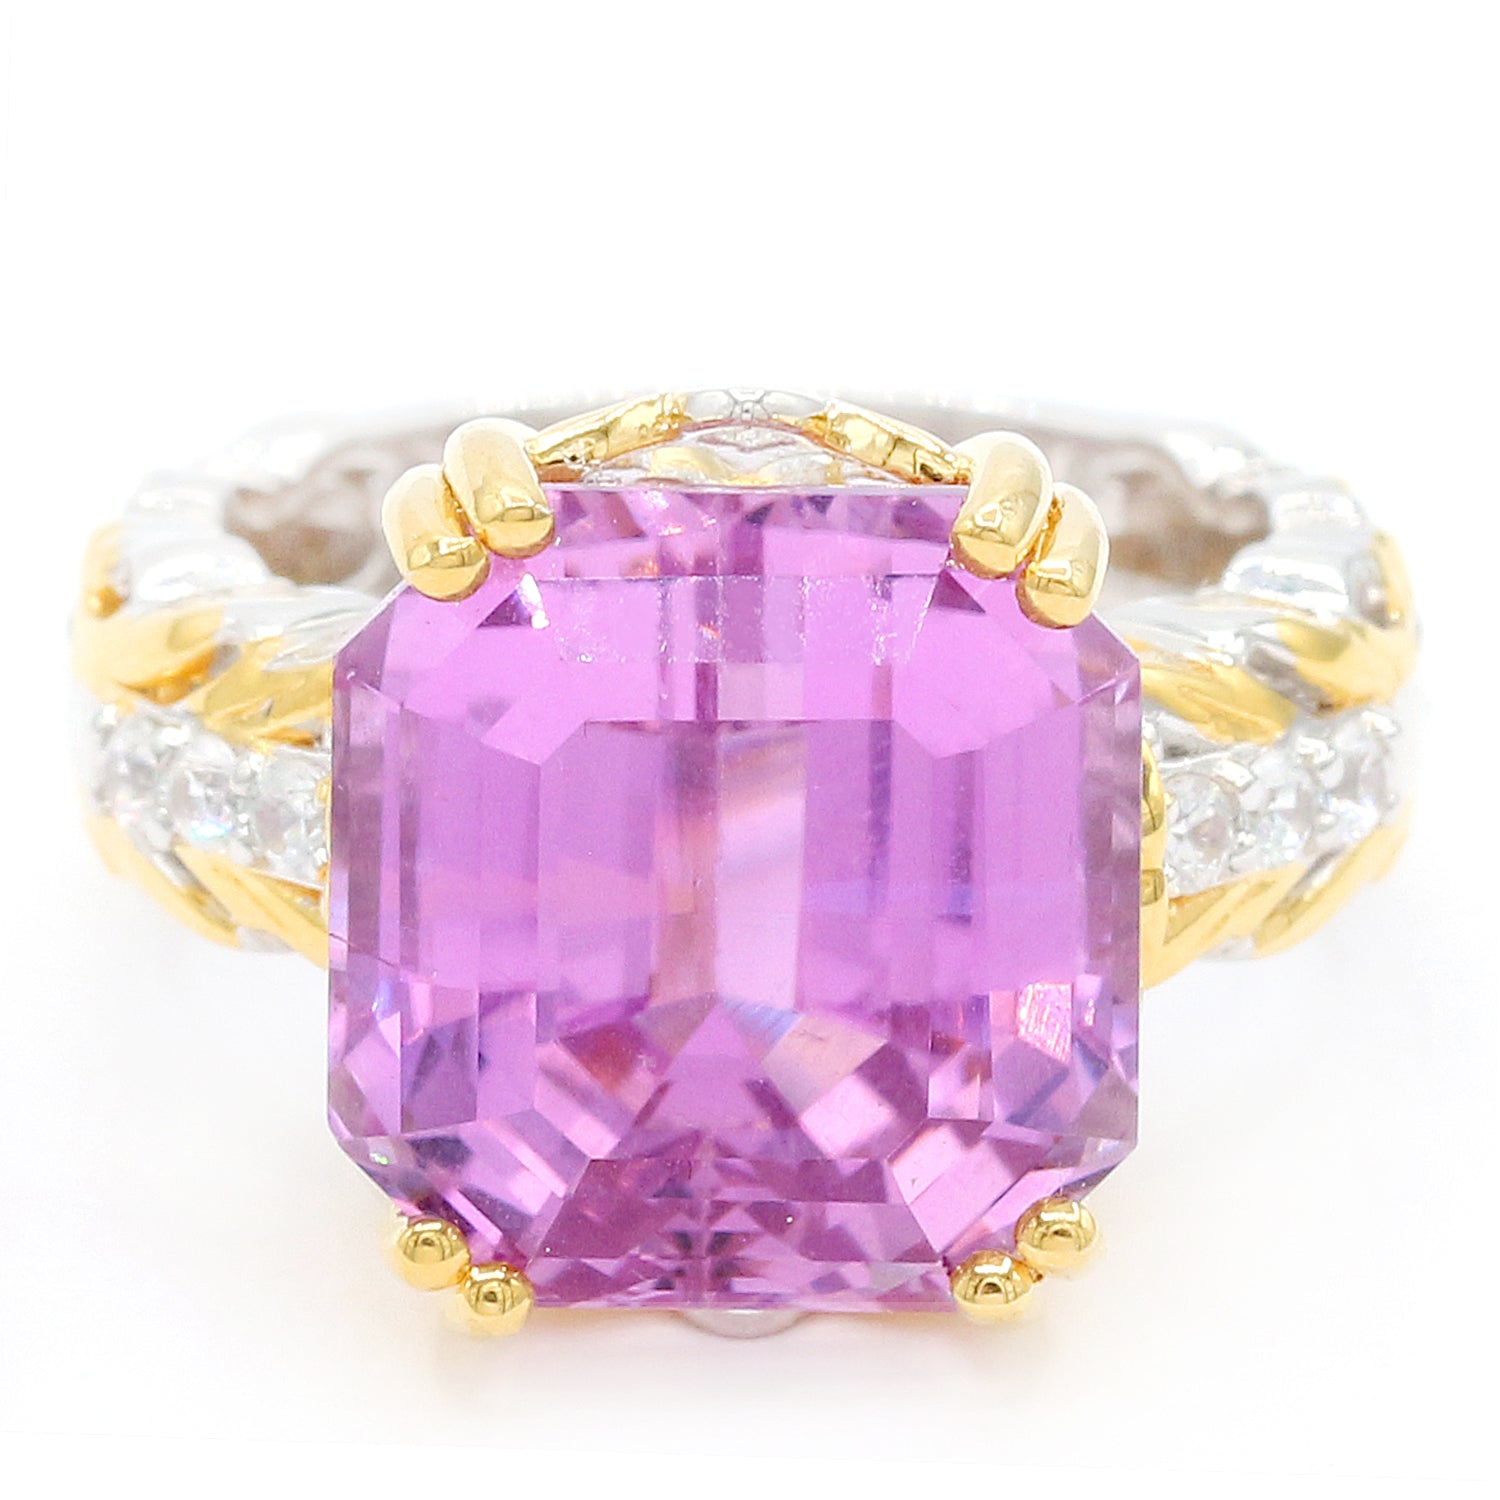 Limited Edition Gems en Vogue Luxe, One-of-a-Kind 17.10ctw Kunzite & White Zircon Ring